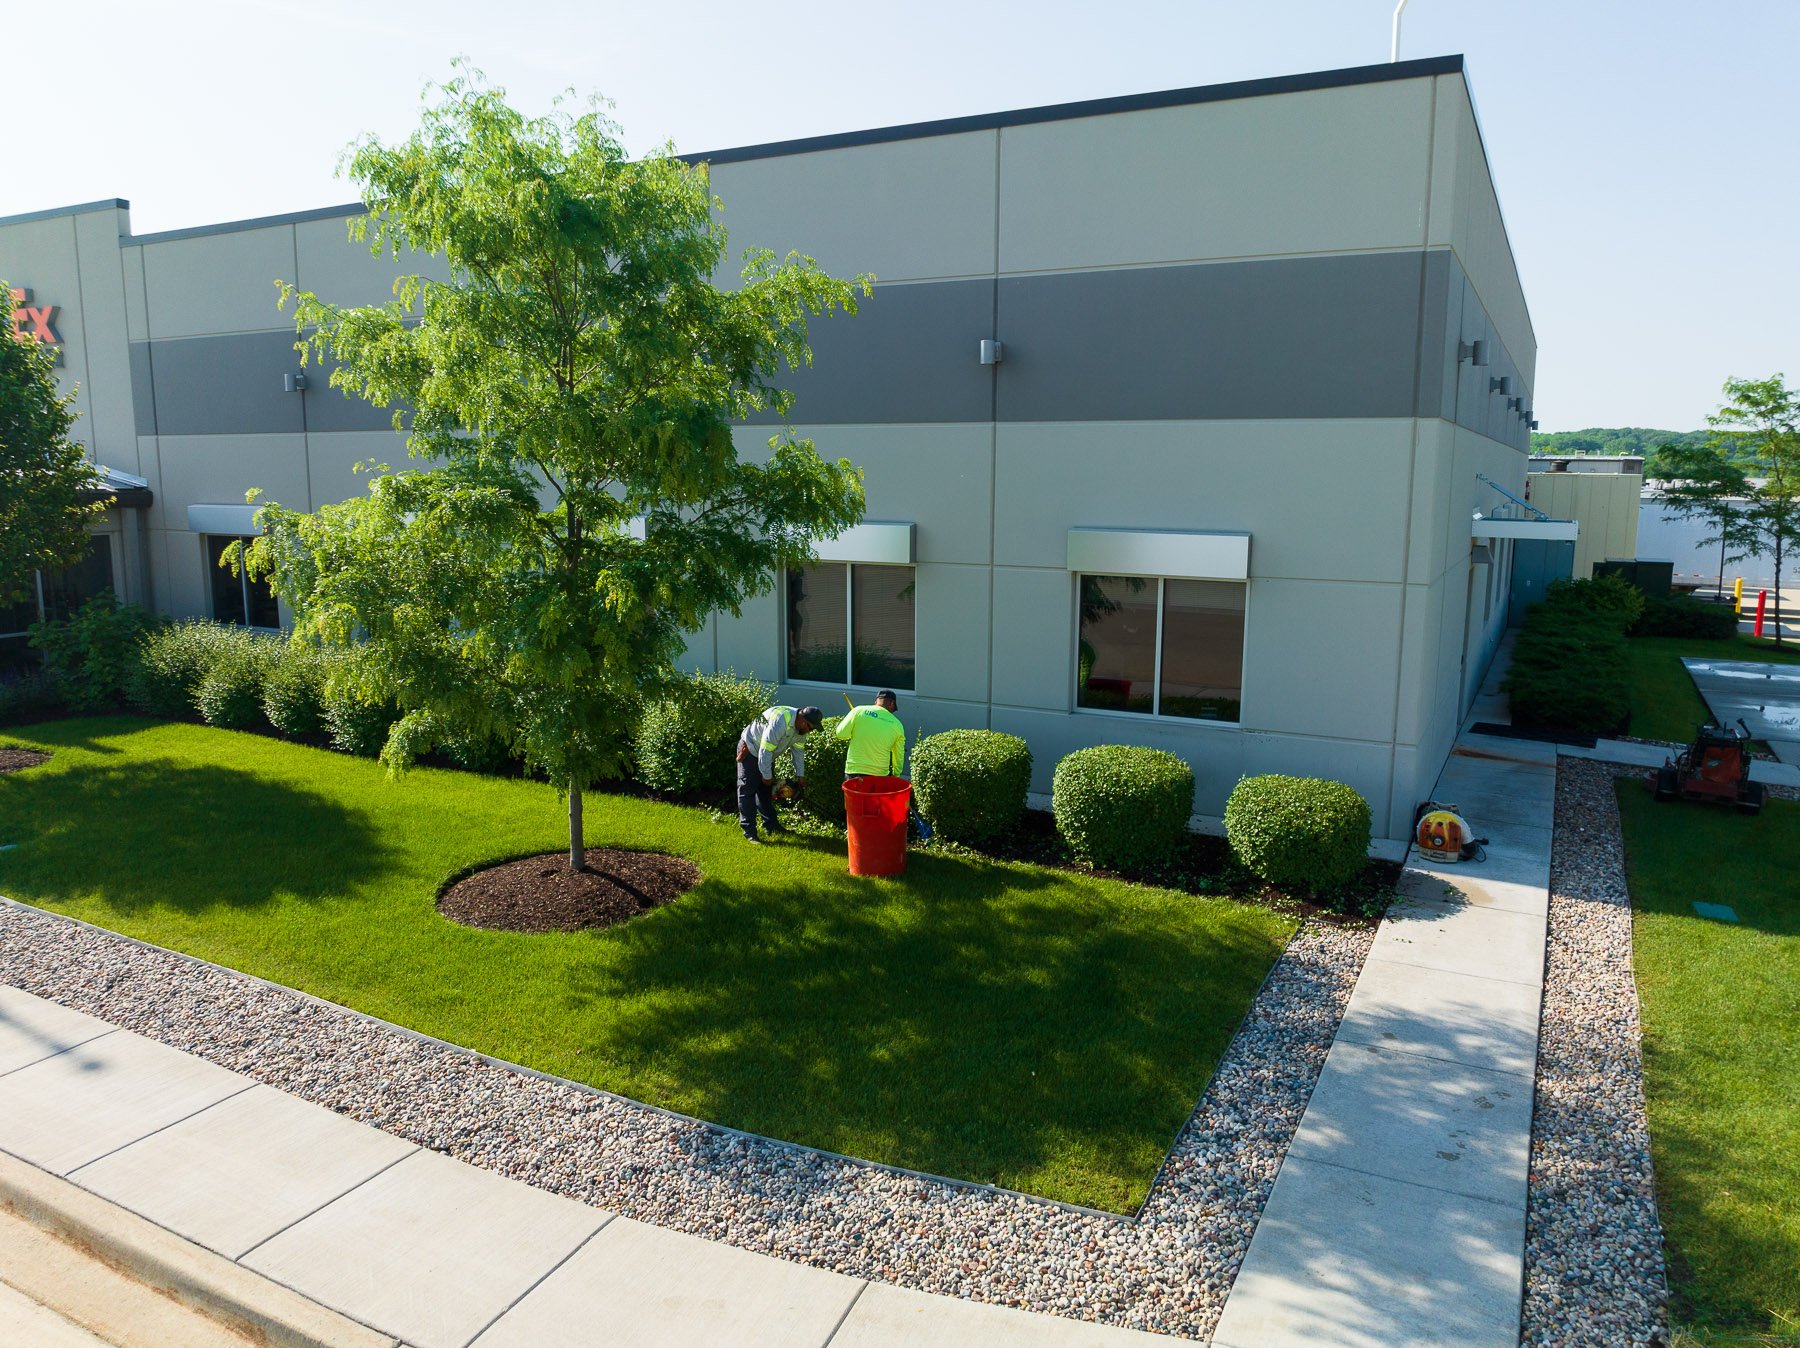 commercial landscape maintenance crew pruning shrubs and cleaning planting beds at a commercial warehouse